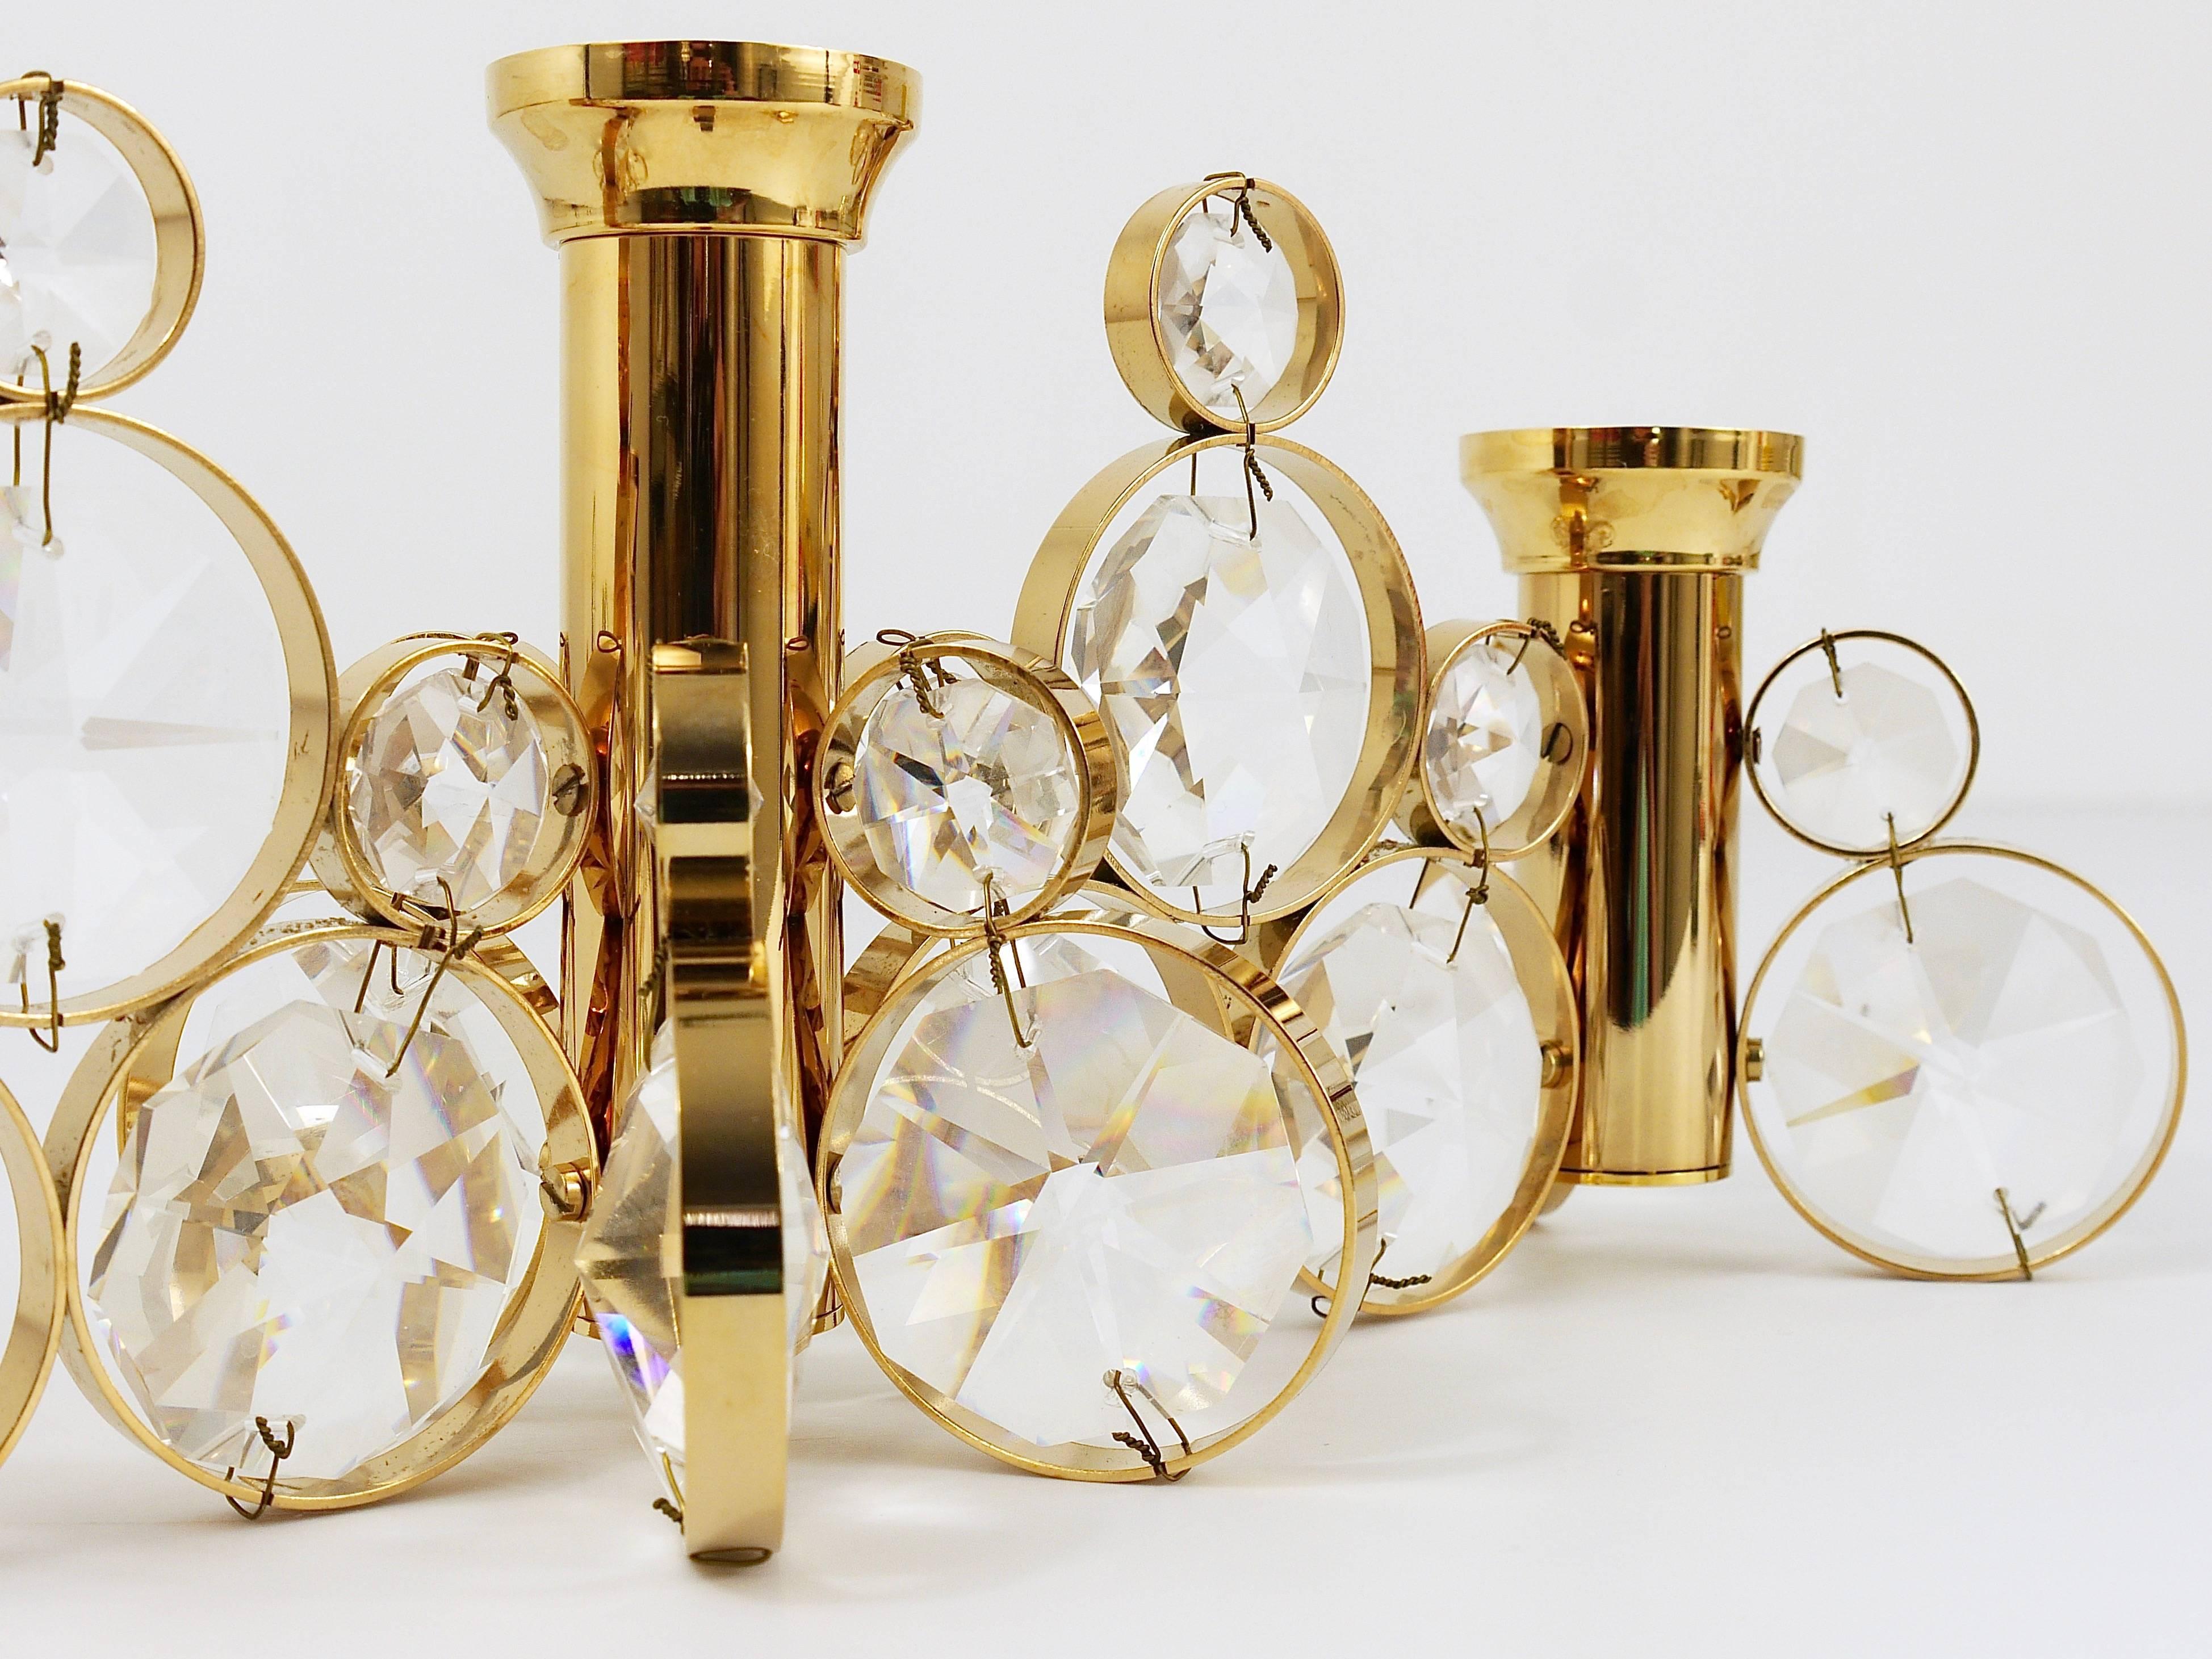 5x Palwa Gaetano Sciolari Style Brass & Crystal Candle Holder Candlestick, 1970s For Sale 1